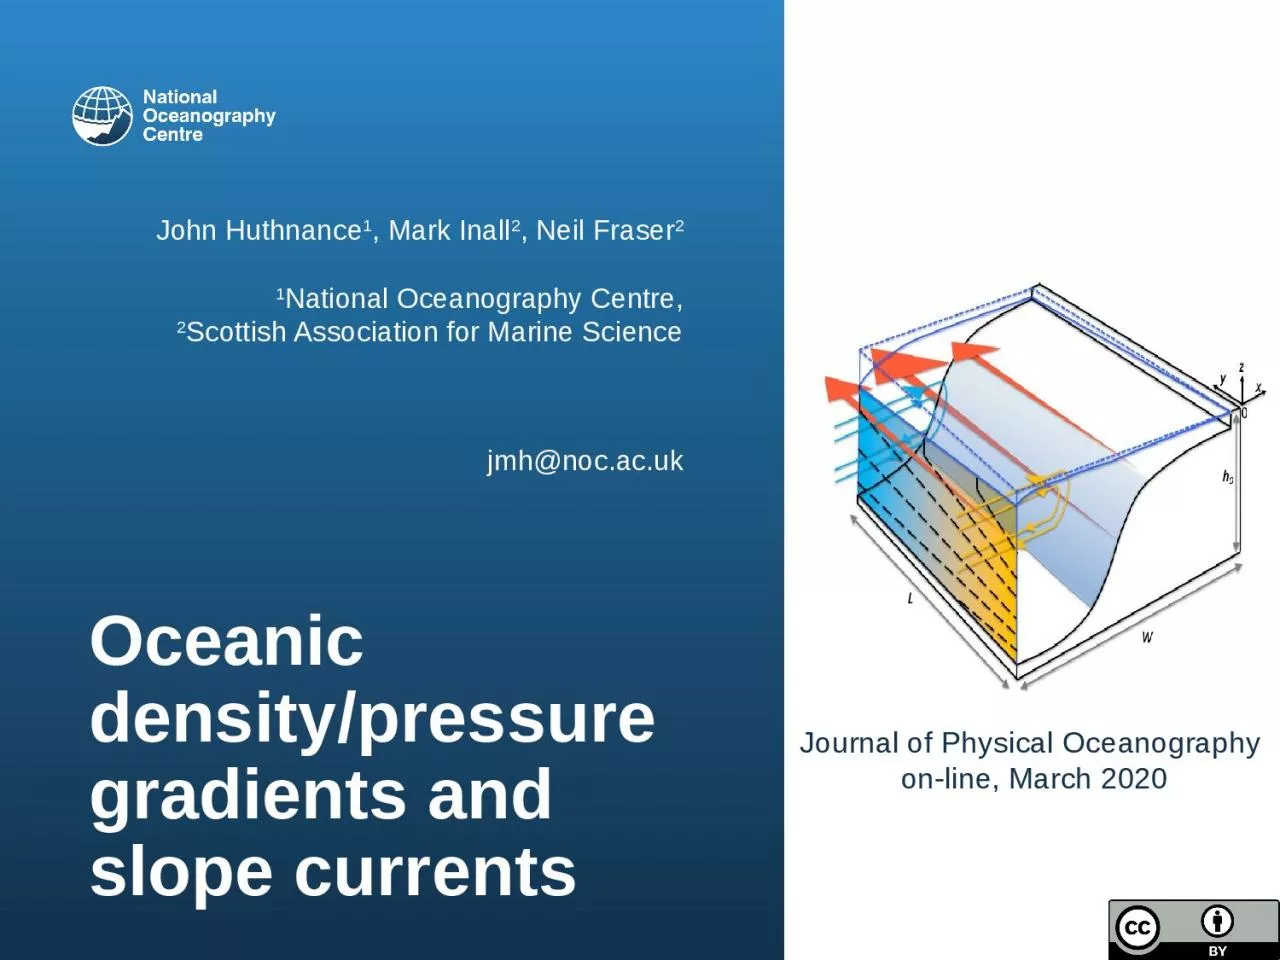 Oceanic density/pressure gradients and slope currents